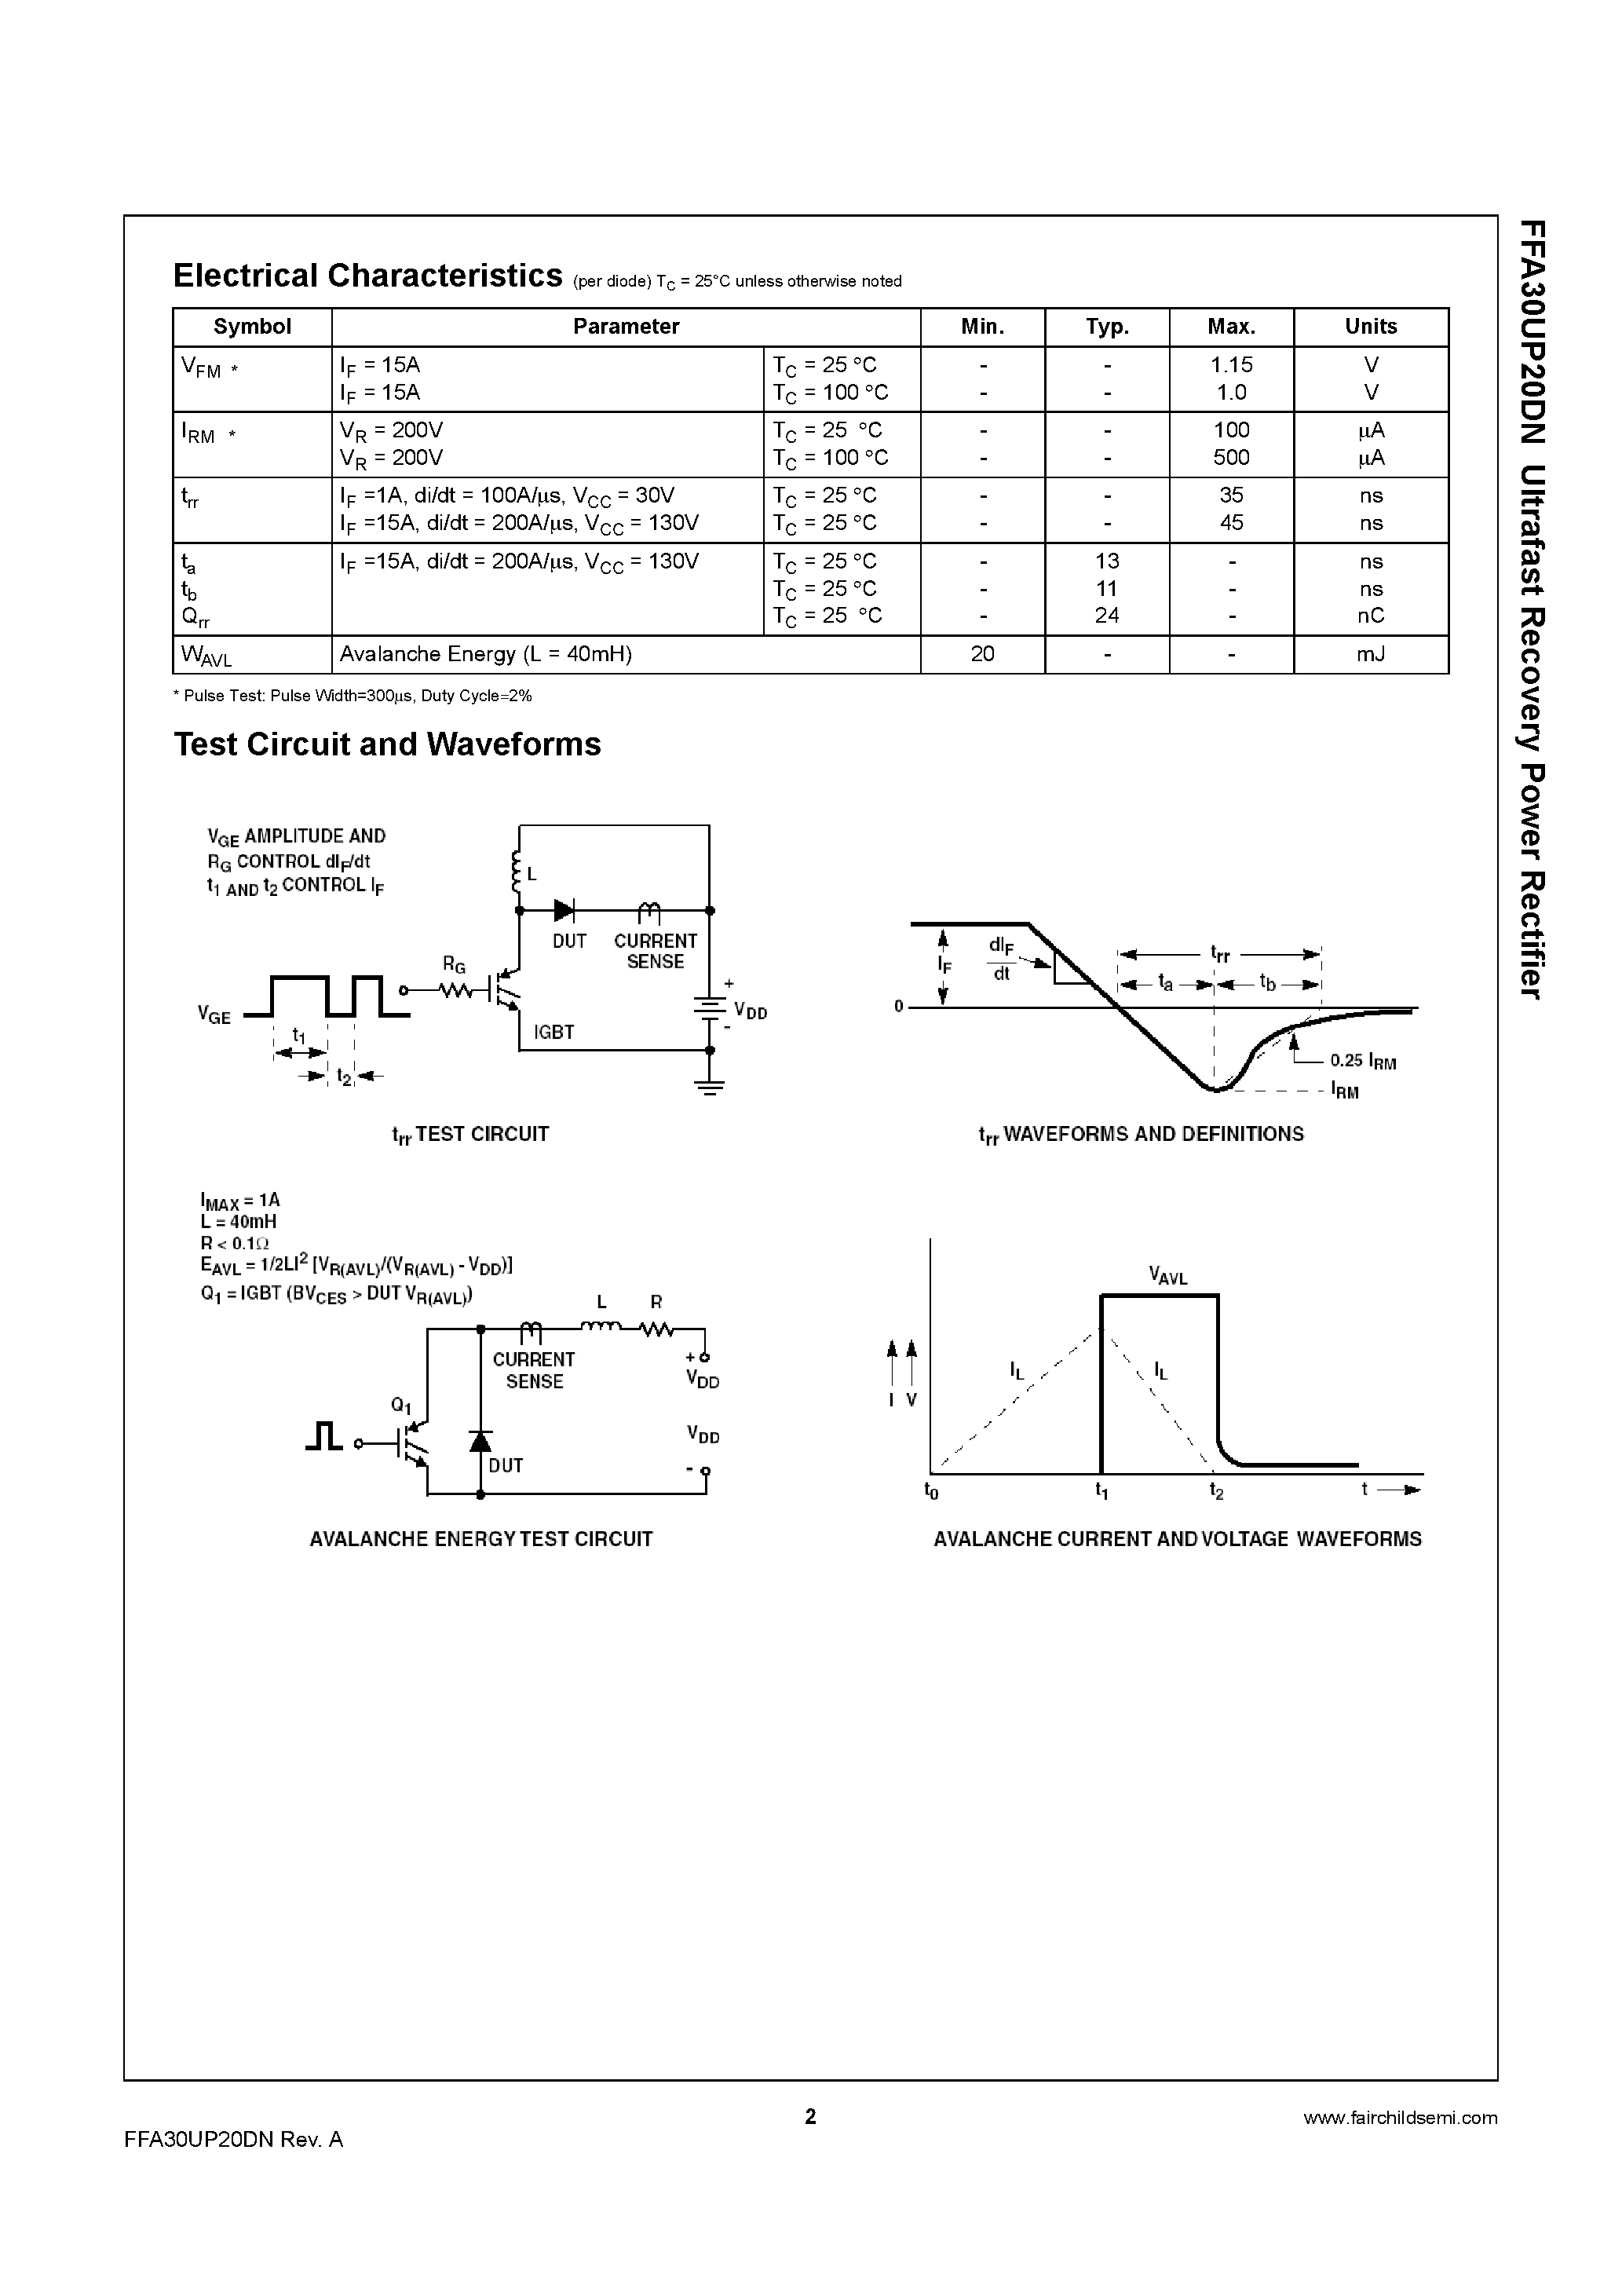 Datasheet FFA30UP20DN - Ultrafast Recovery Power Rectifier page 2